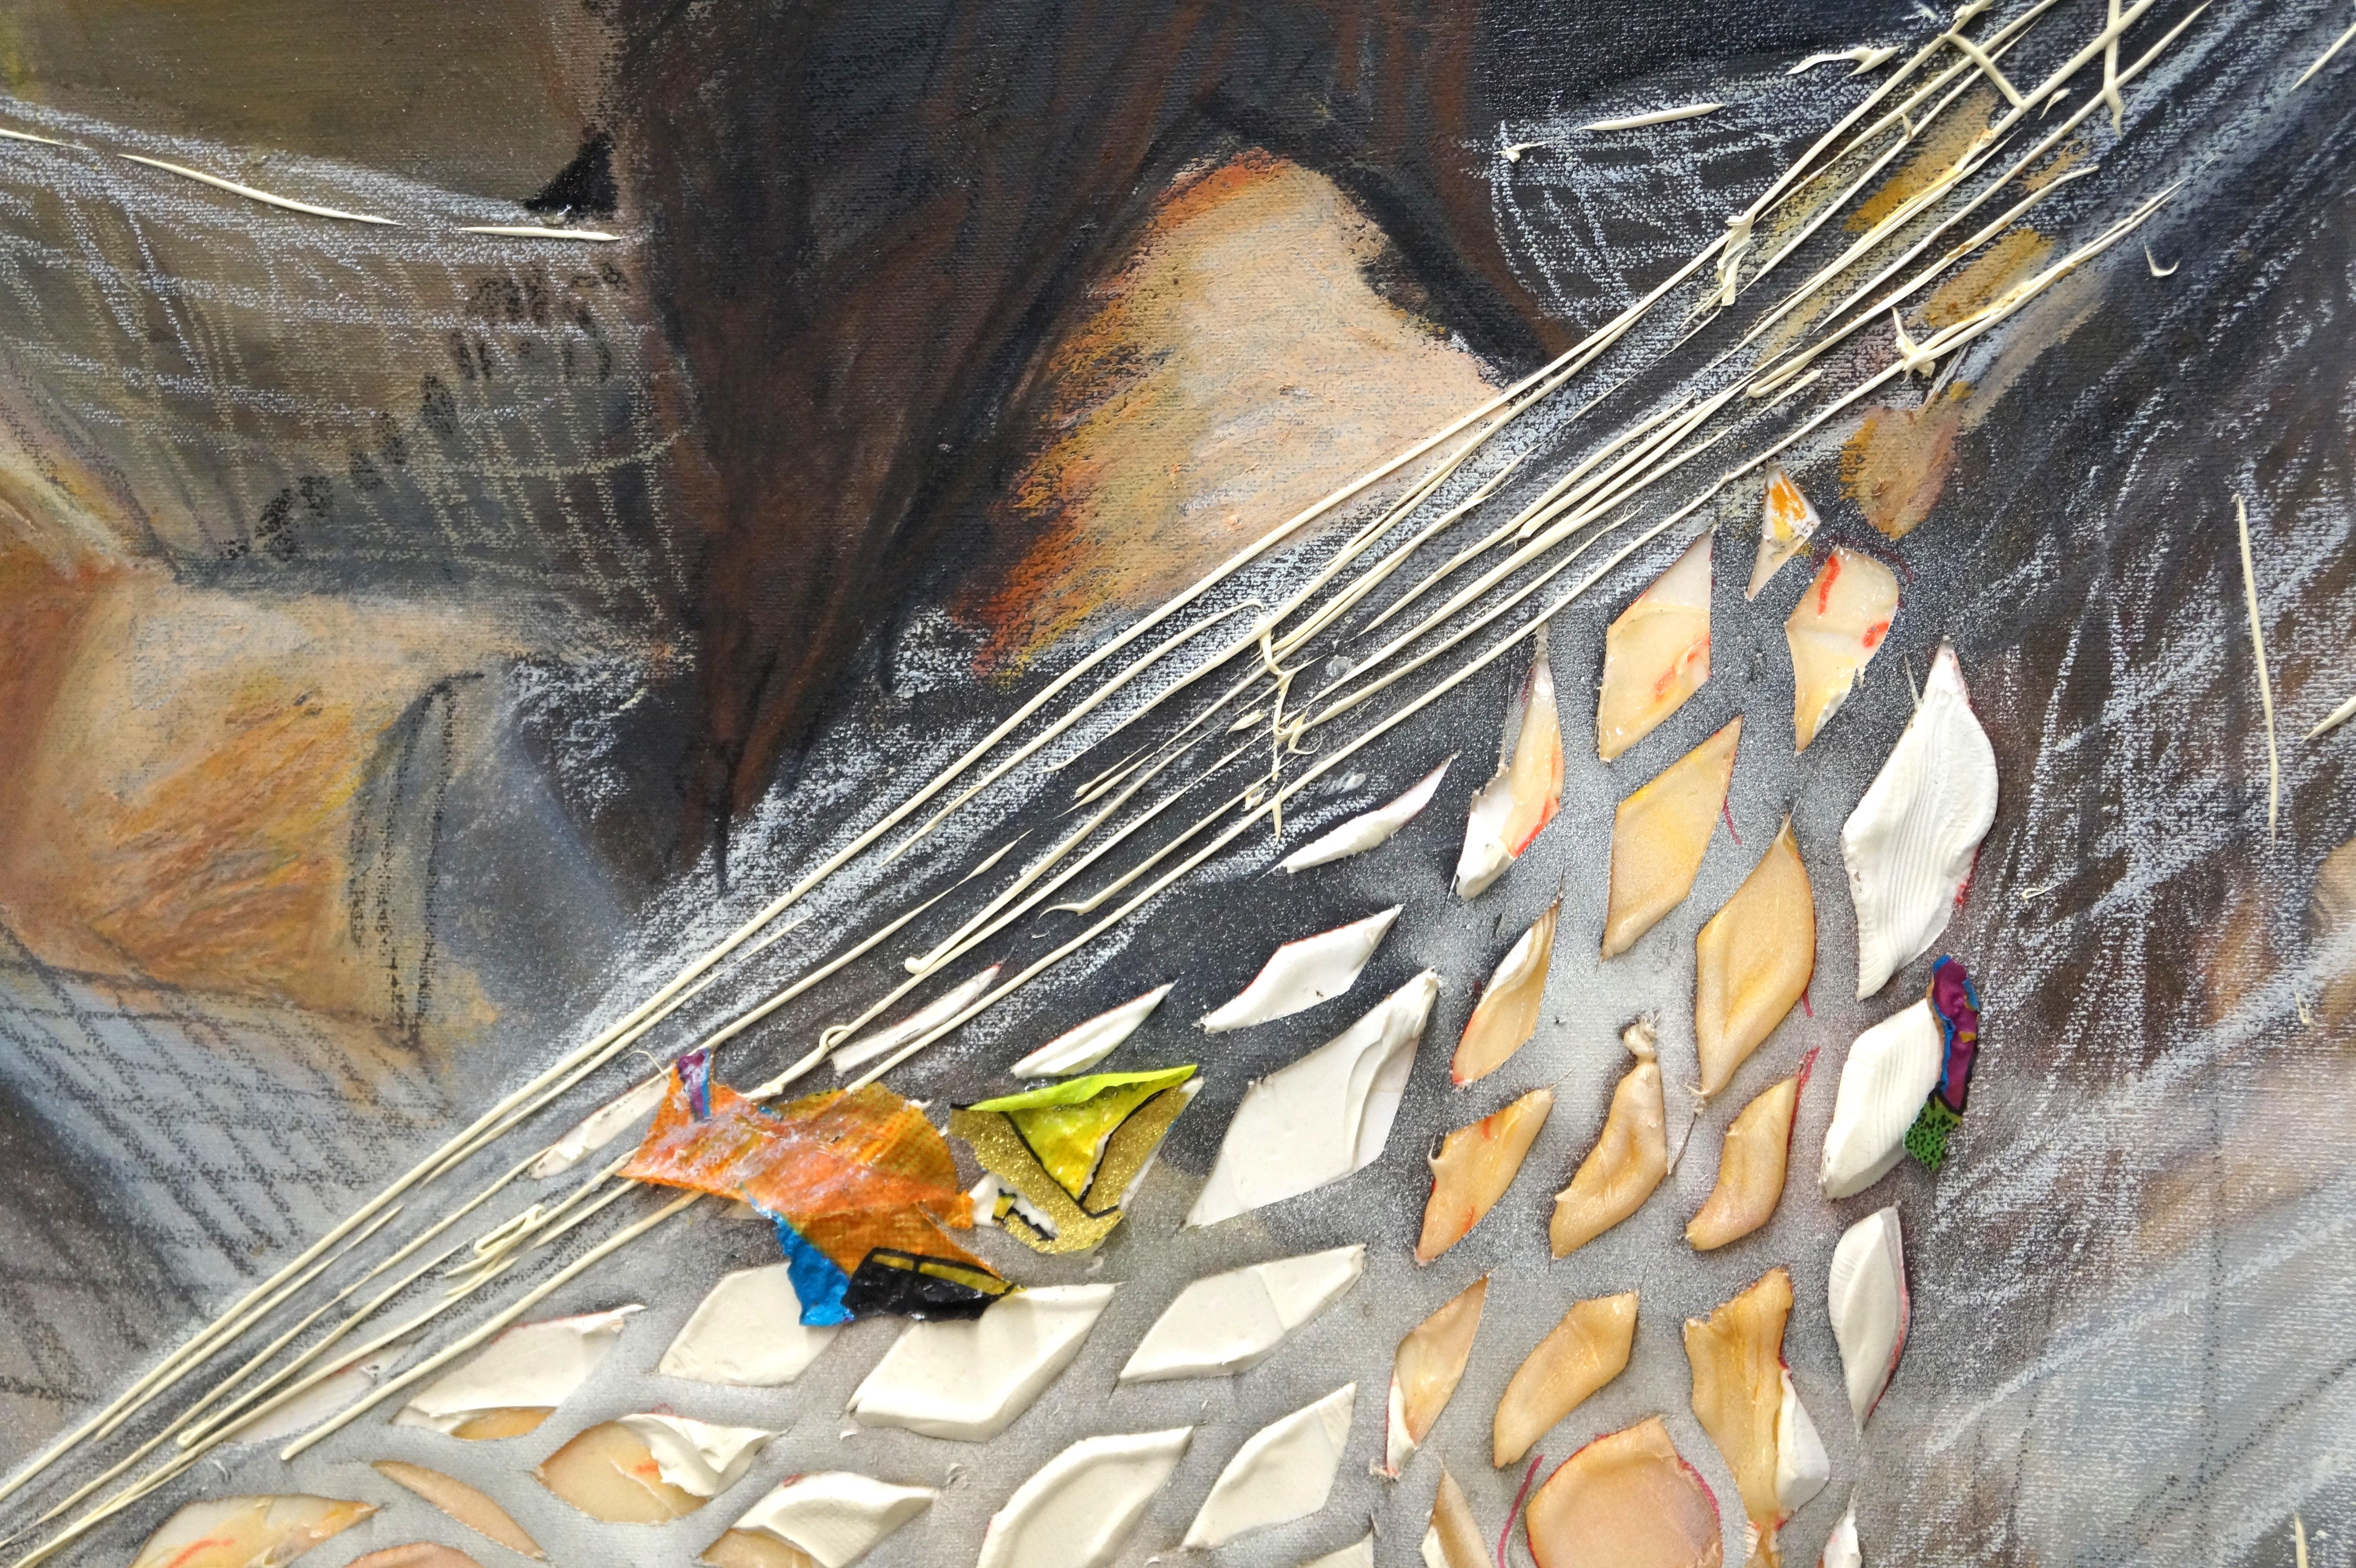 Eleanor Aldrich’s mixed media painting “The Net Hammock” is a textural rendering of a figure resting in a sprawling hammock.  Made of oil, enamel, silicone, caulking, and found transfers on canvas, “The Net Hammock” is one of ten paintings in